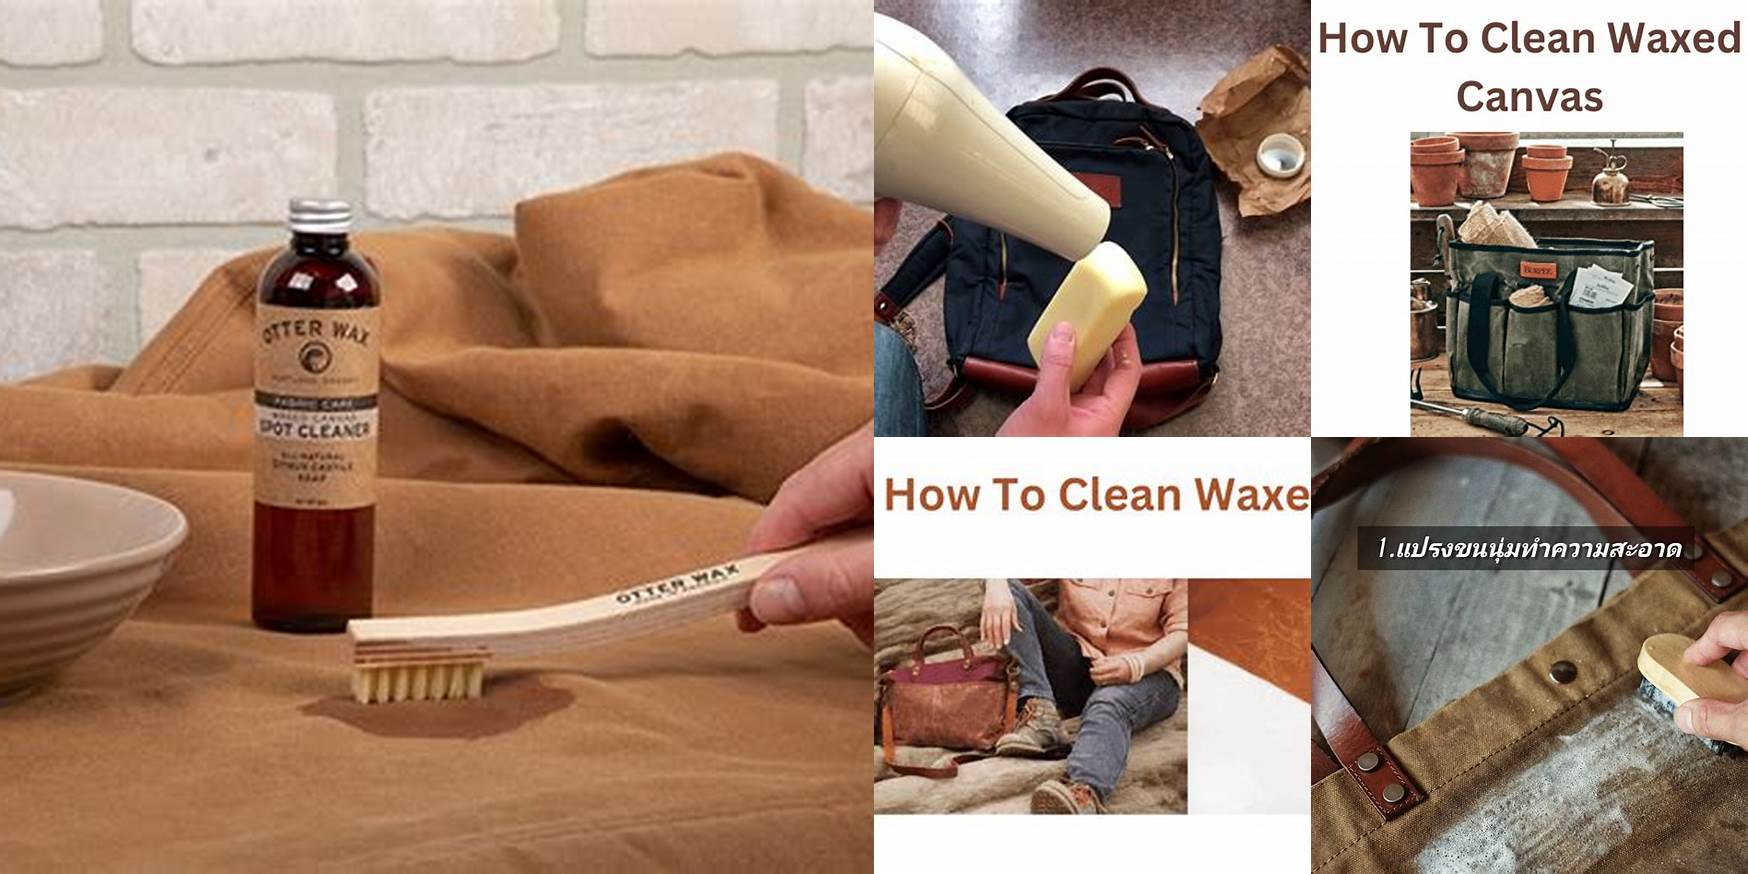 How To Wash Waxed Canvas